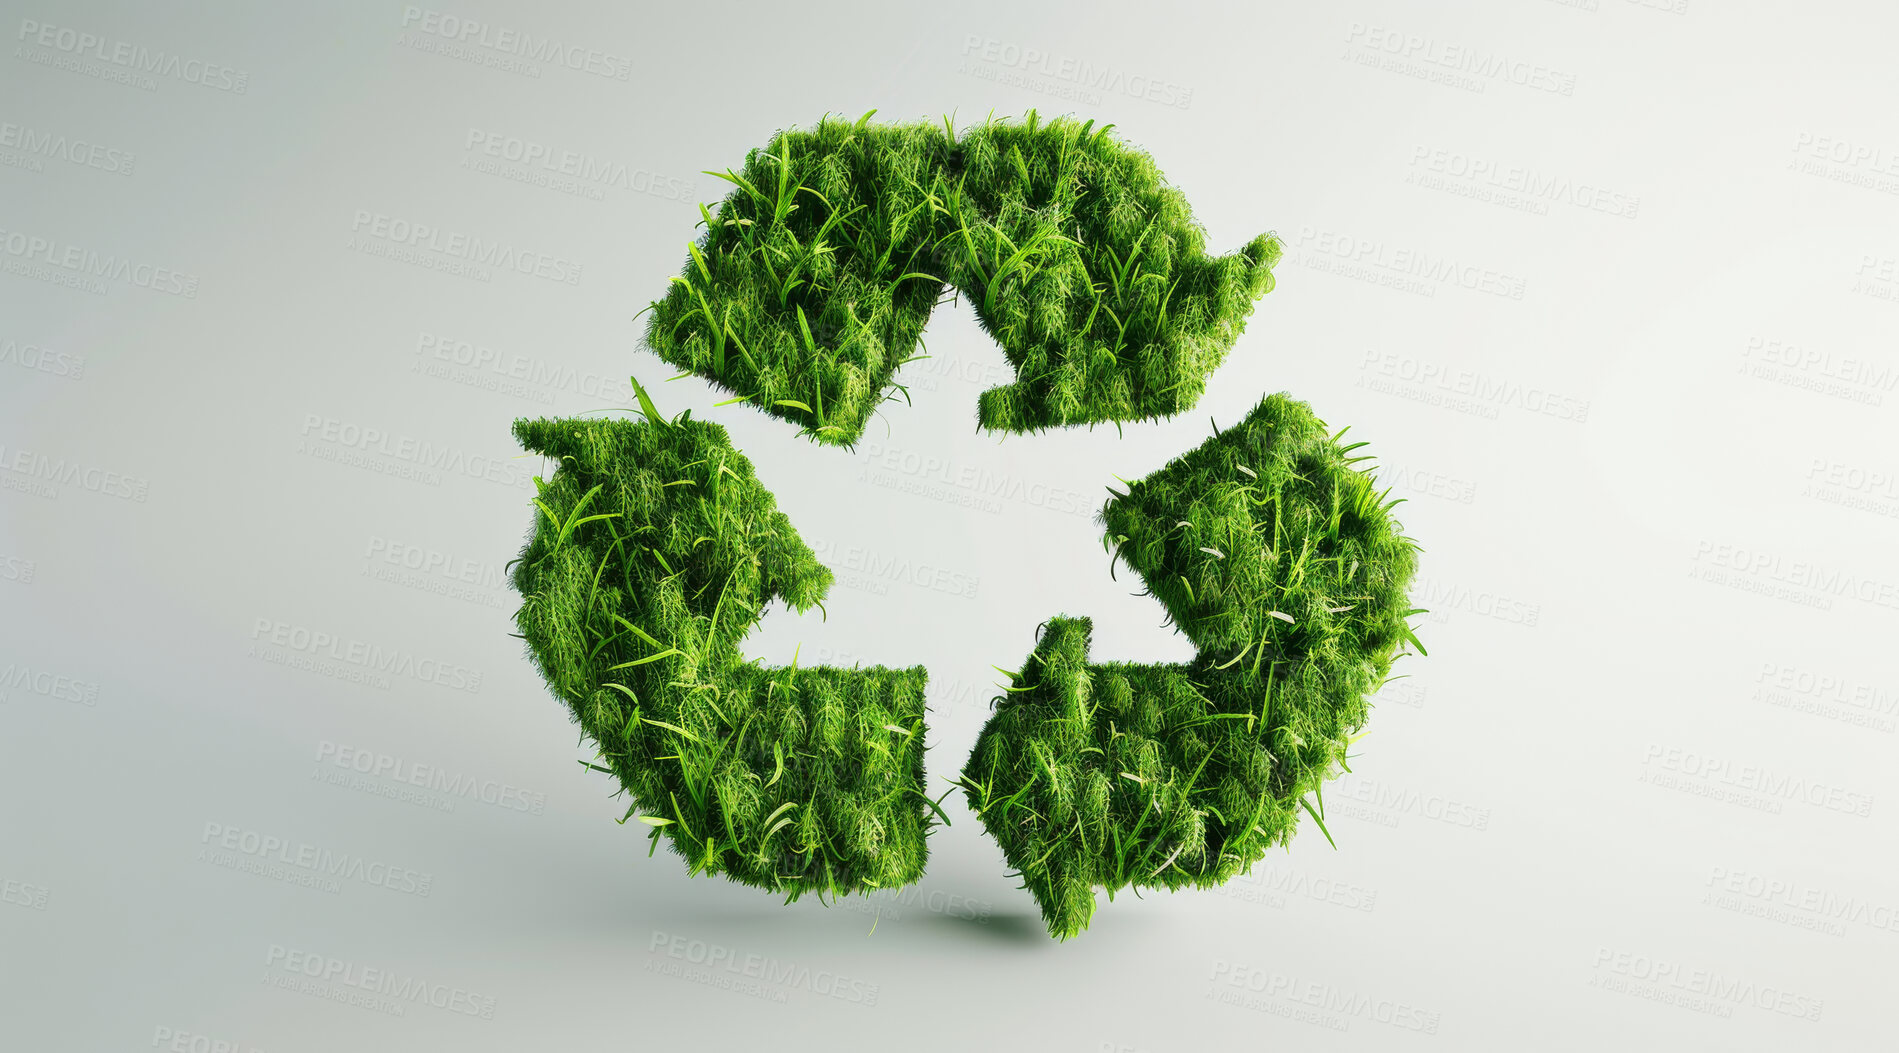 Buy stock photo Recycle, eco friendly and nature poster design for environmental, awareness and sustainability concept. White background, mockup and symbol with copyspace for Earth Day, eco system or ecology logo